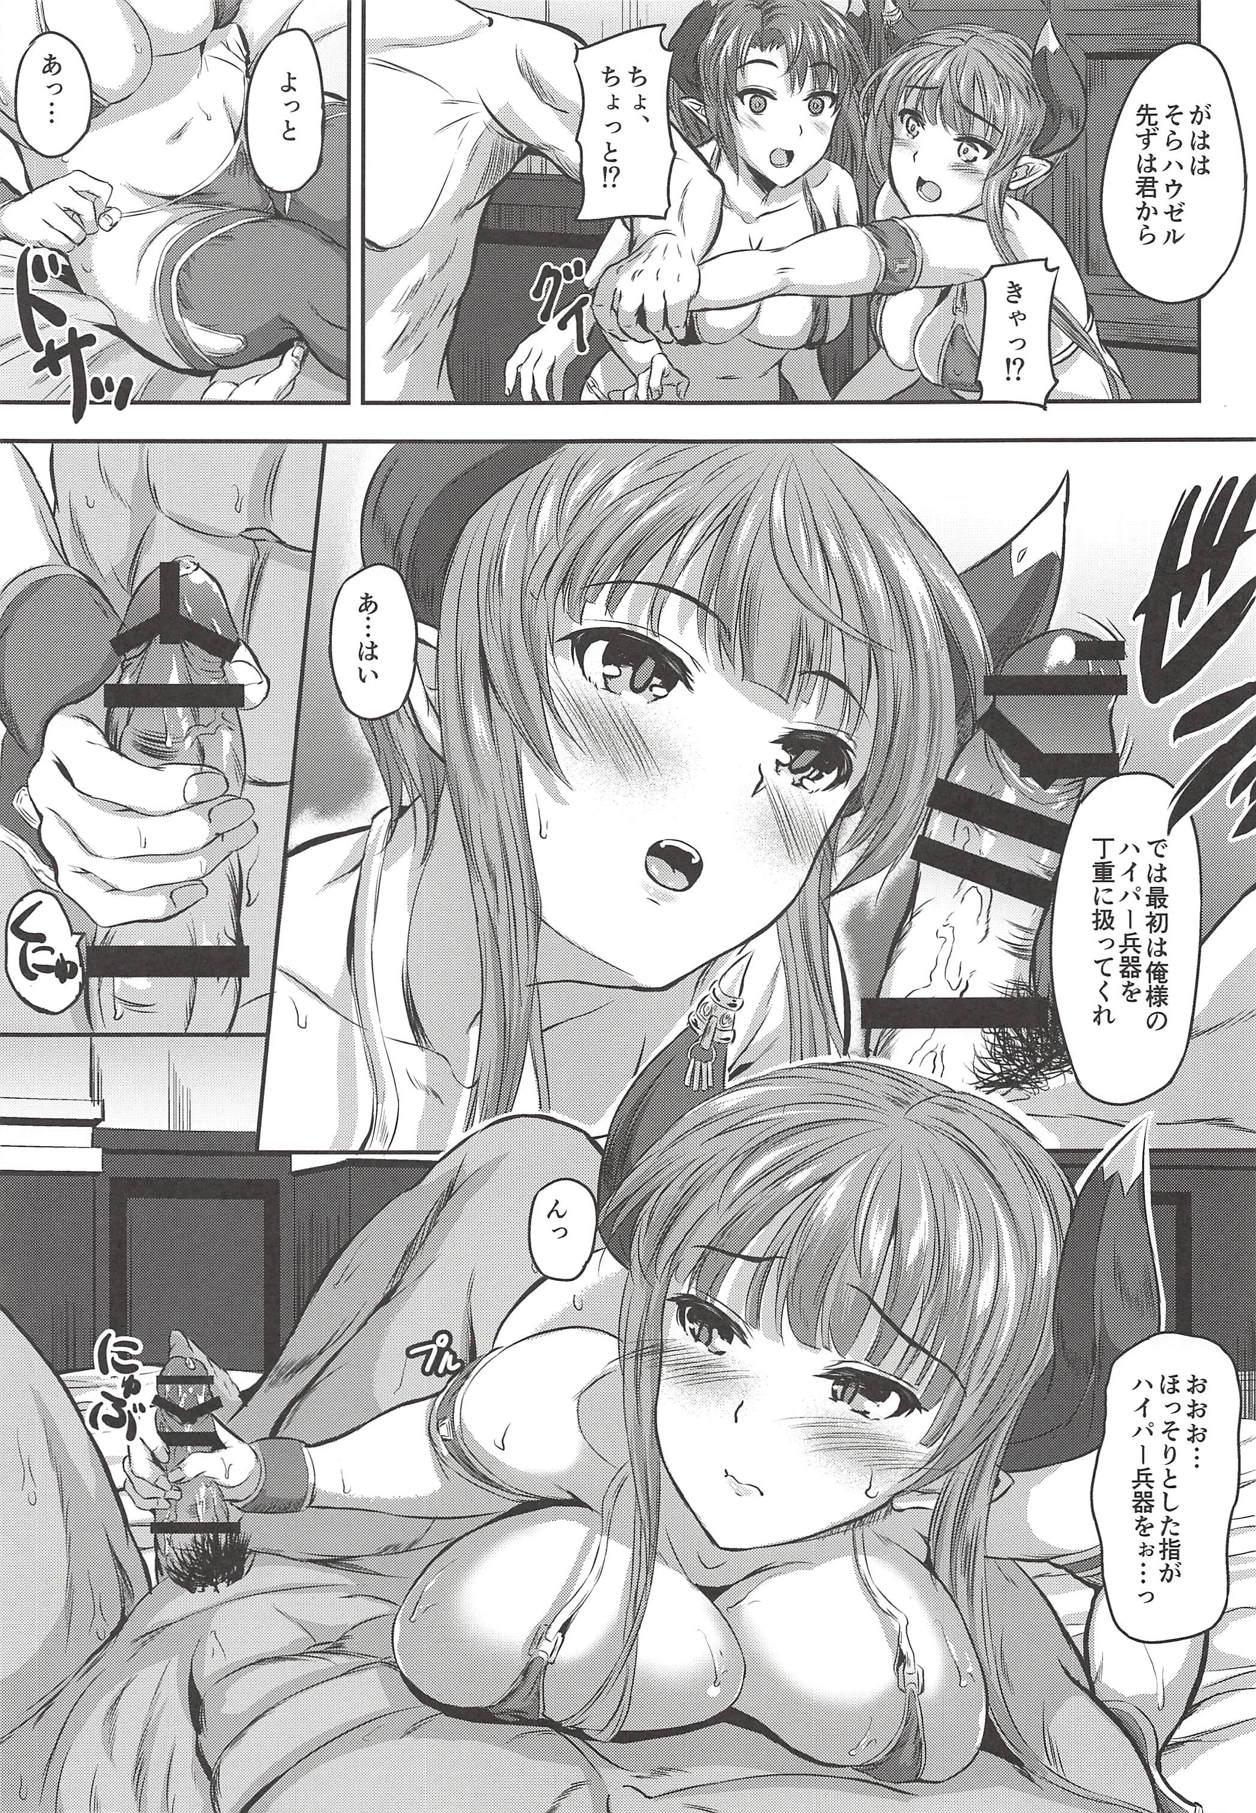 Mmf Sisters that get along well - Rance Sentando - Page 4